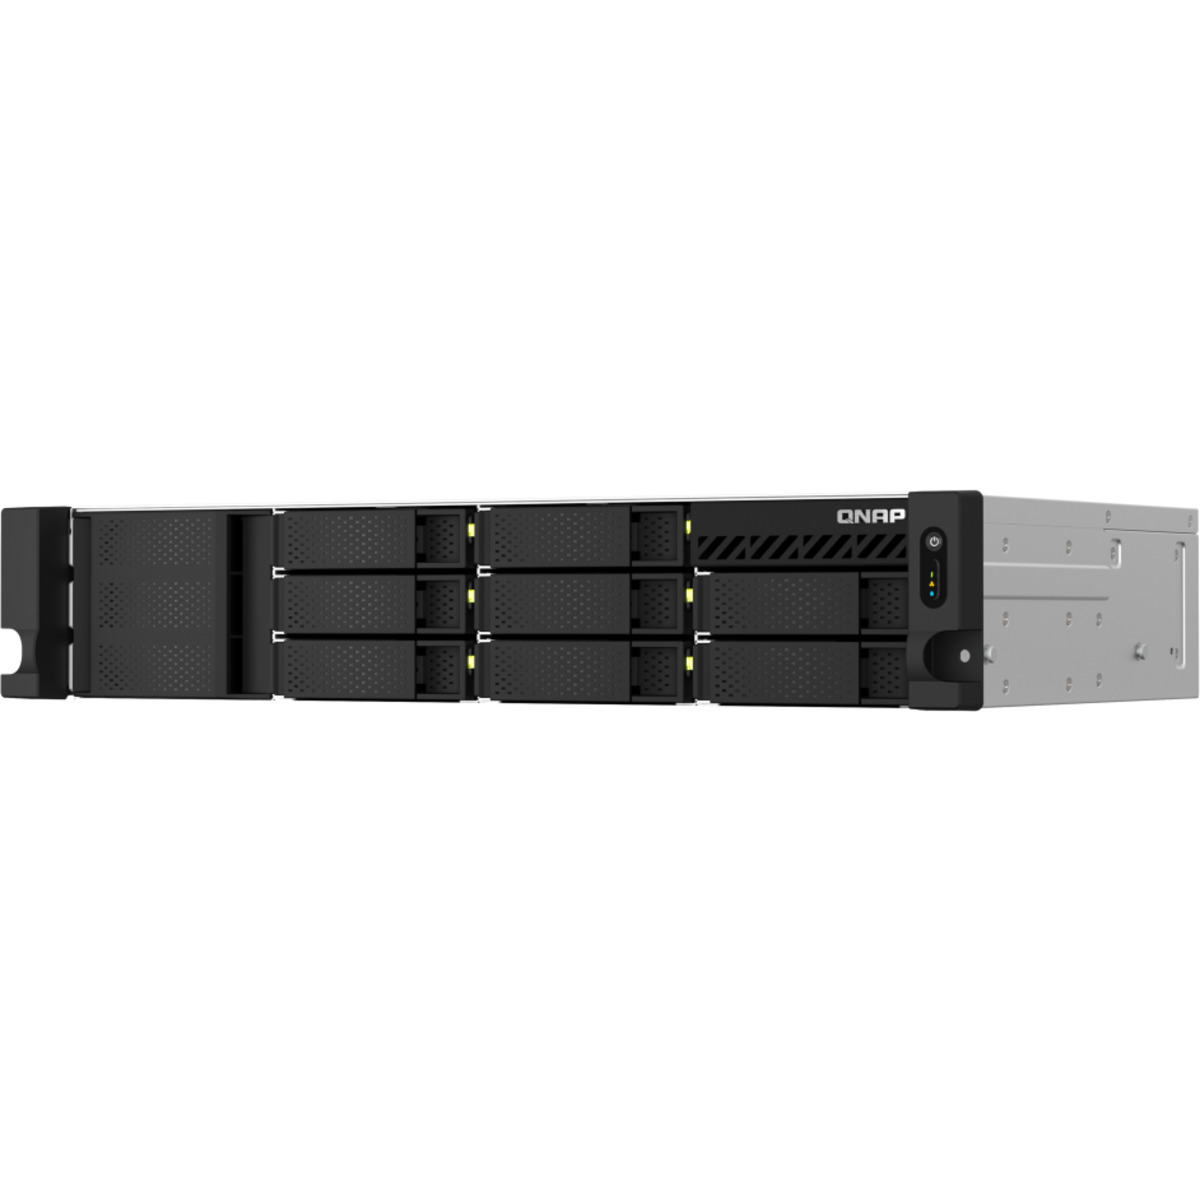 buy QNAP TS-864eU-RP 48tb RackMount NAS - Network Attached Storage Device 8x6000gb Western Digital Red WD60EFAX 3.5 5400rpm SATA 6Gb/s HDD NAS Class Drives Installed - Burn-In Tested - ON SALE - nas headquarters buy network attached storage server device das new raid-5 free shipping usa spring sale TS-864eU-RP